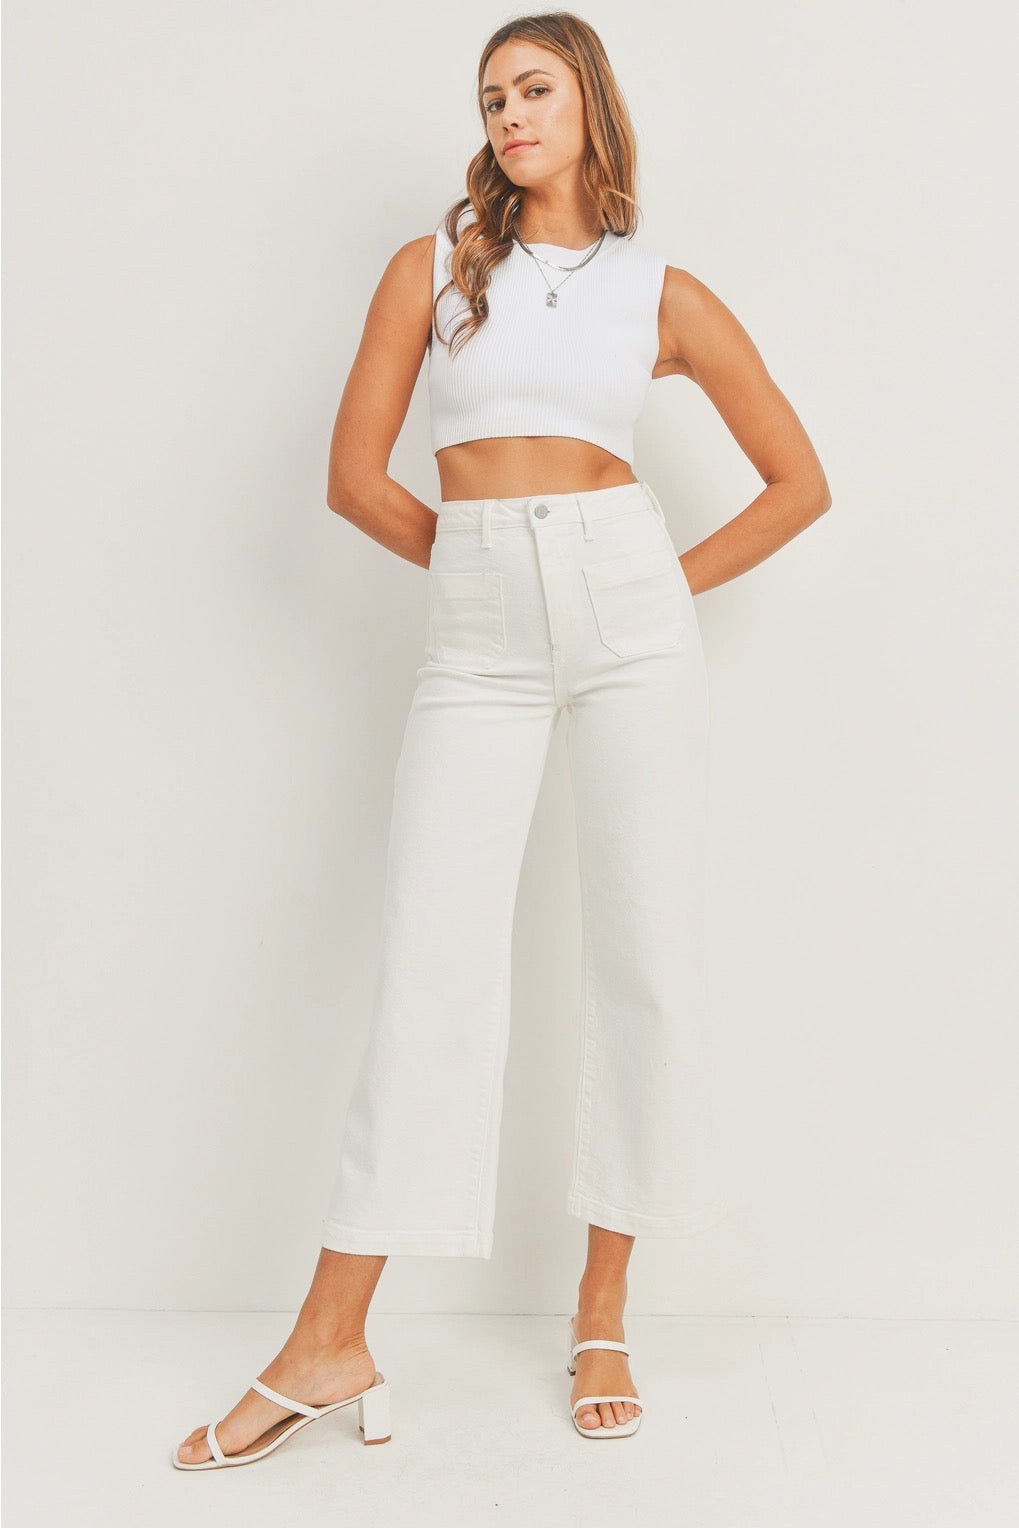 White Patch Pocket Wide Leg Jeans - Spicy Chic Boutique